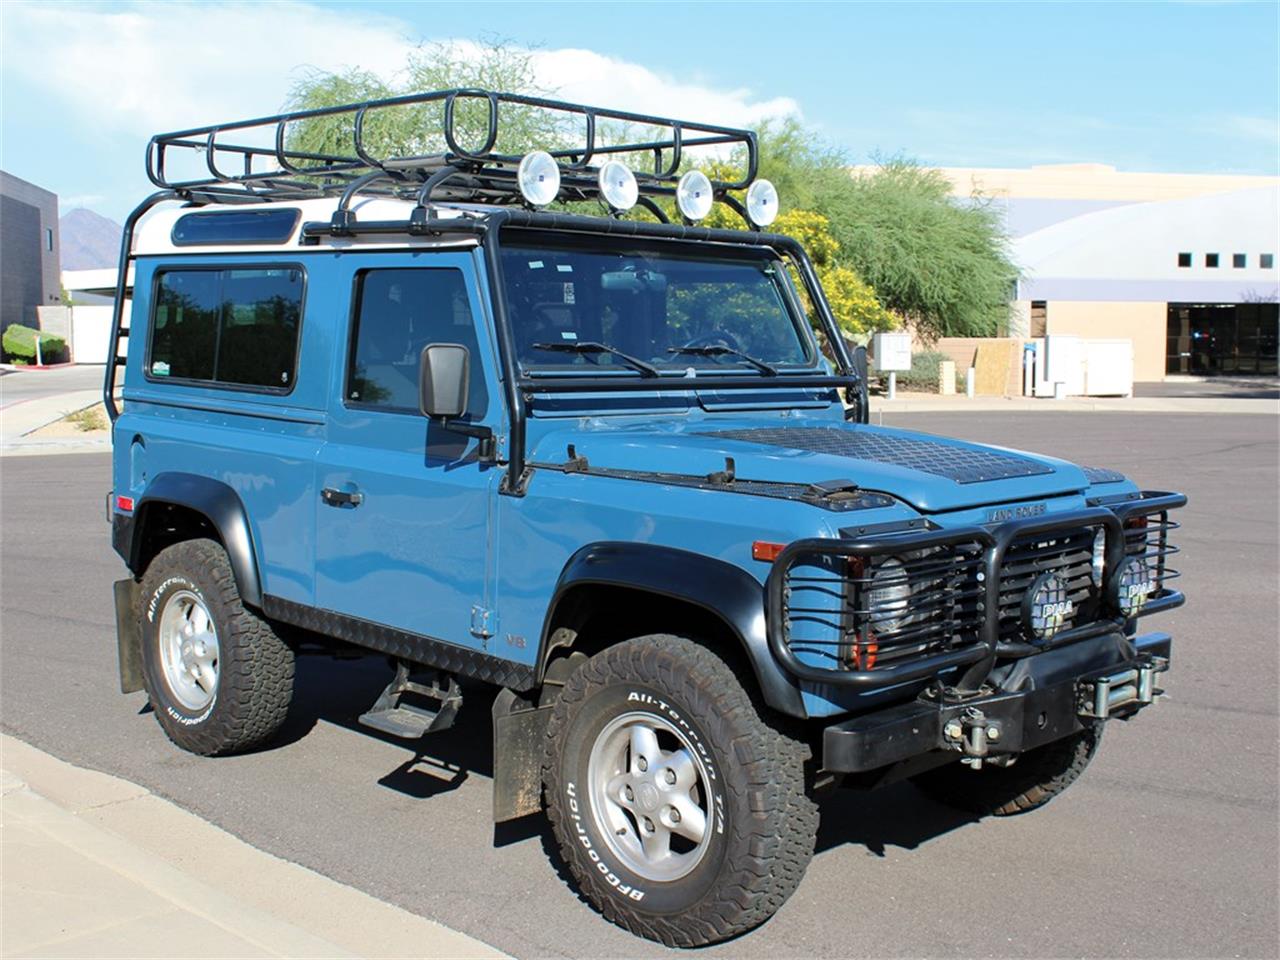 Classic Land Rover Defender For Sale On